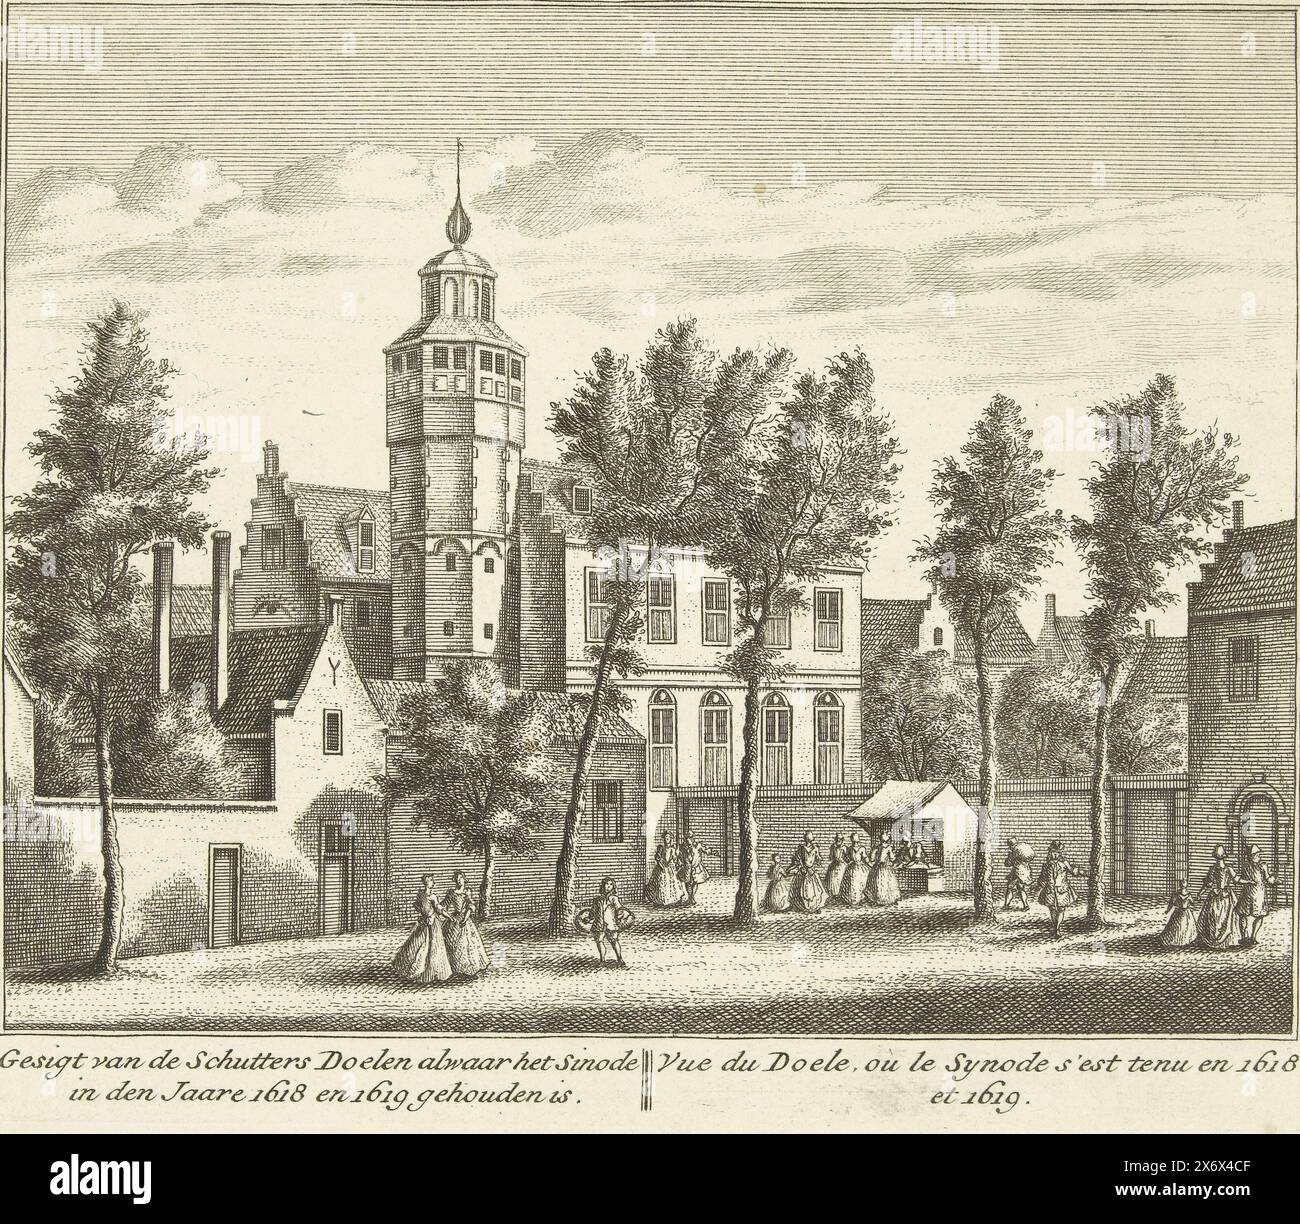 View of the Kloveniersdoelen in Dordrecht where the National Synod was held in 1618-1619, View of the Schutters Doelen where the Sinode was held in the years 1618 and 1619, Vue du Doele, où le Synode s'est tenu en 1618 et 1619 ( title on object), View of the Kloveniersdoelen in Dordrecht where the National Synod was held in the years 1618-1619 (Synod of Dordrecht). In the foreground a stall and some passers-by., print, print maker: Leonard Schenk, after drawing by: Abraham Rademaker, publisher: Leonard Schenk, (possibly), Amsterdam, 1736, paper, etching, engraving, height, 170 mm × width, 198 Stock Photo